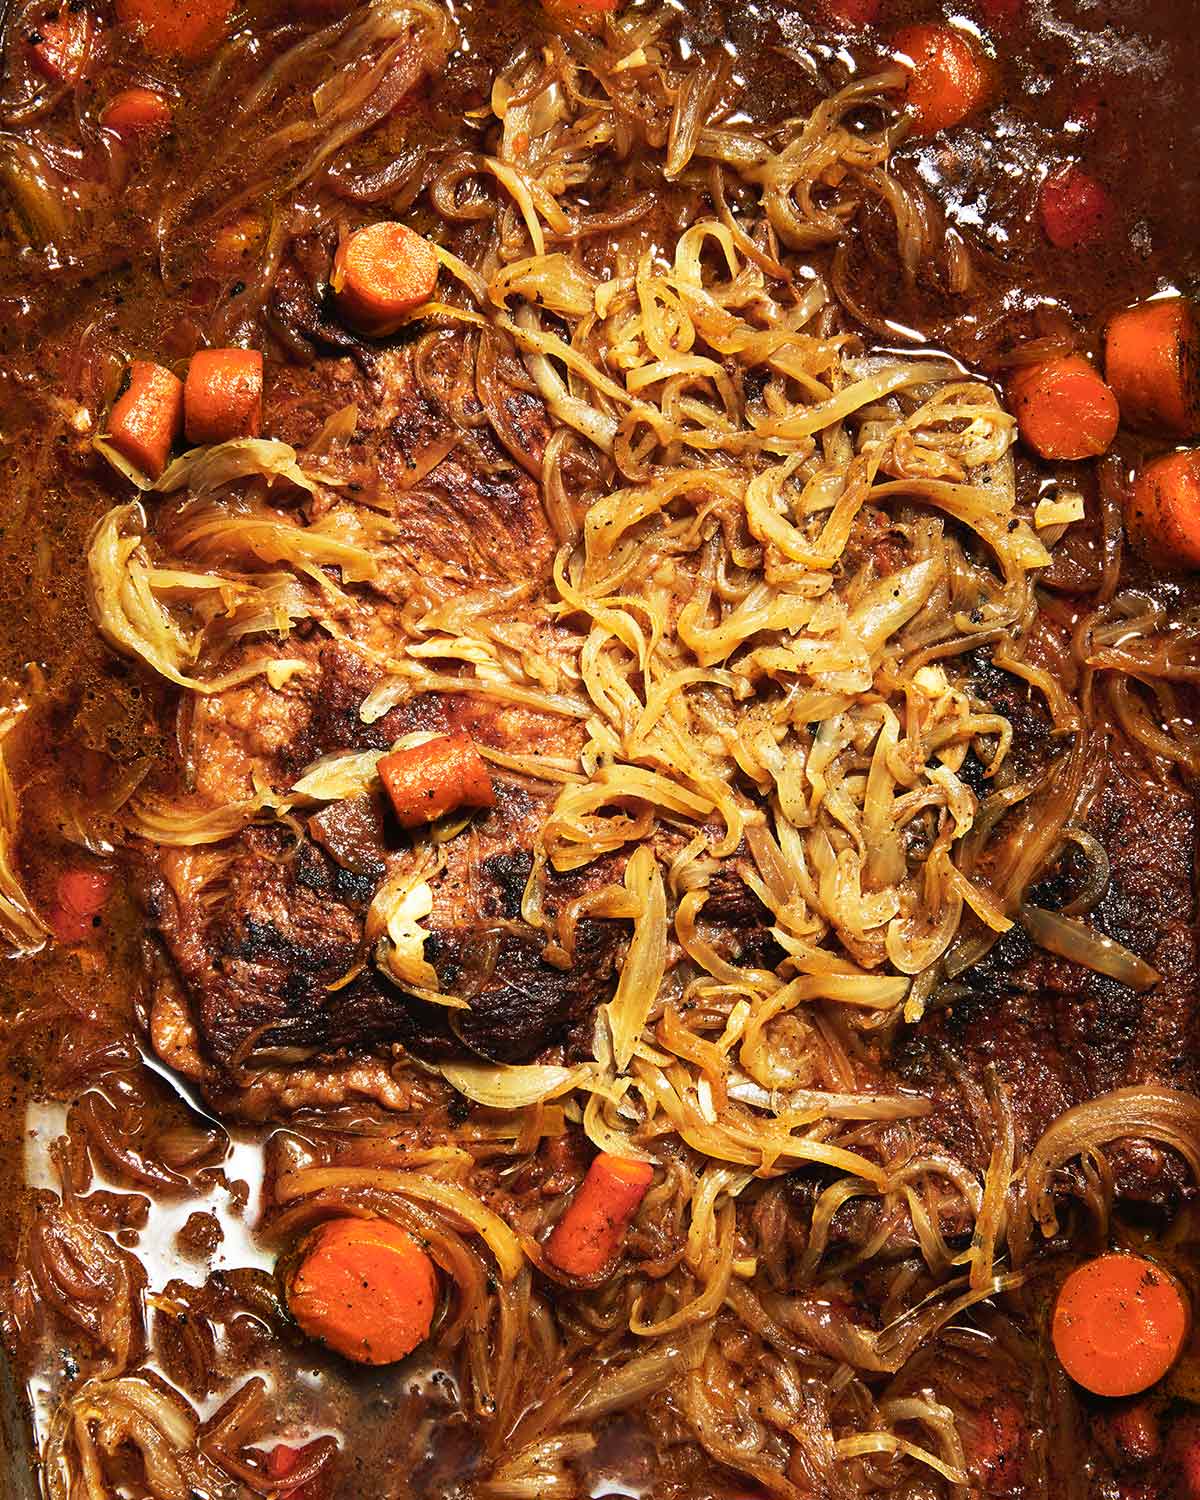 A partially submerged braised brisket with onions and carrots scattered on and around it.